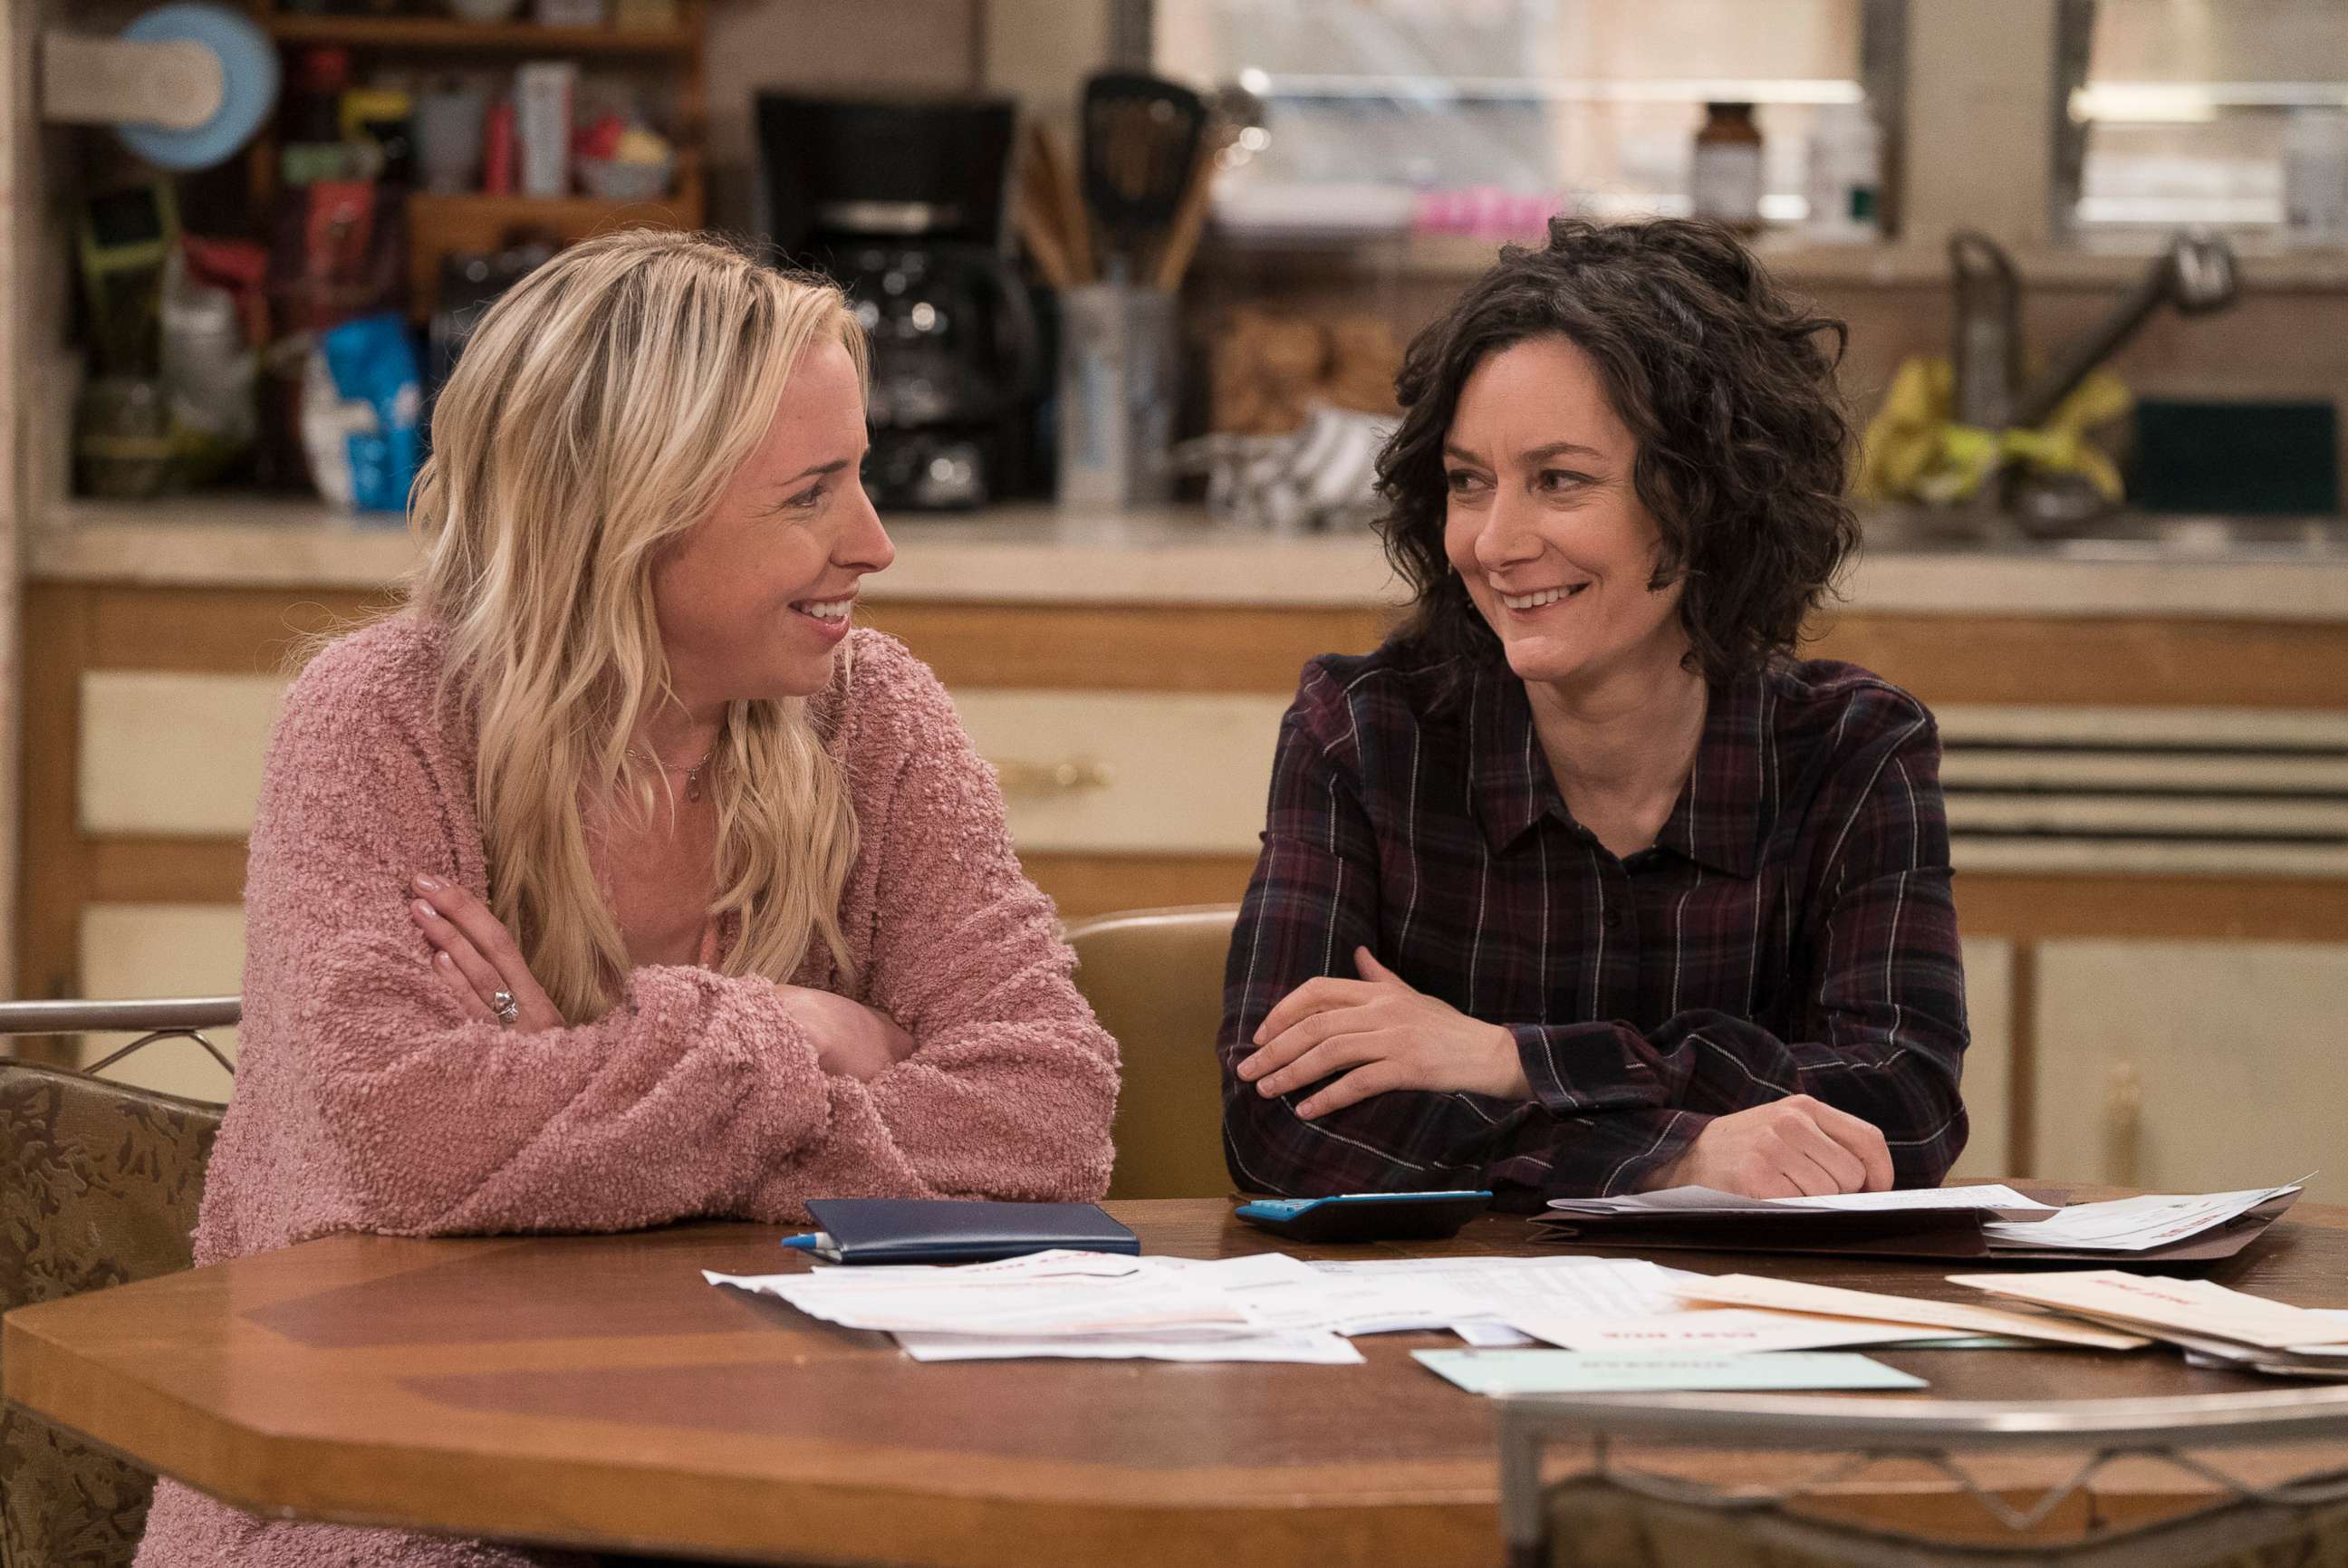 PHOTO: Lecy Goranson and Sara Gilbert in a scene from "The Conners."